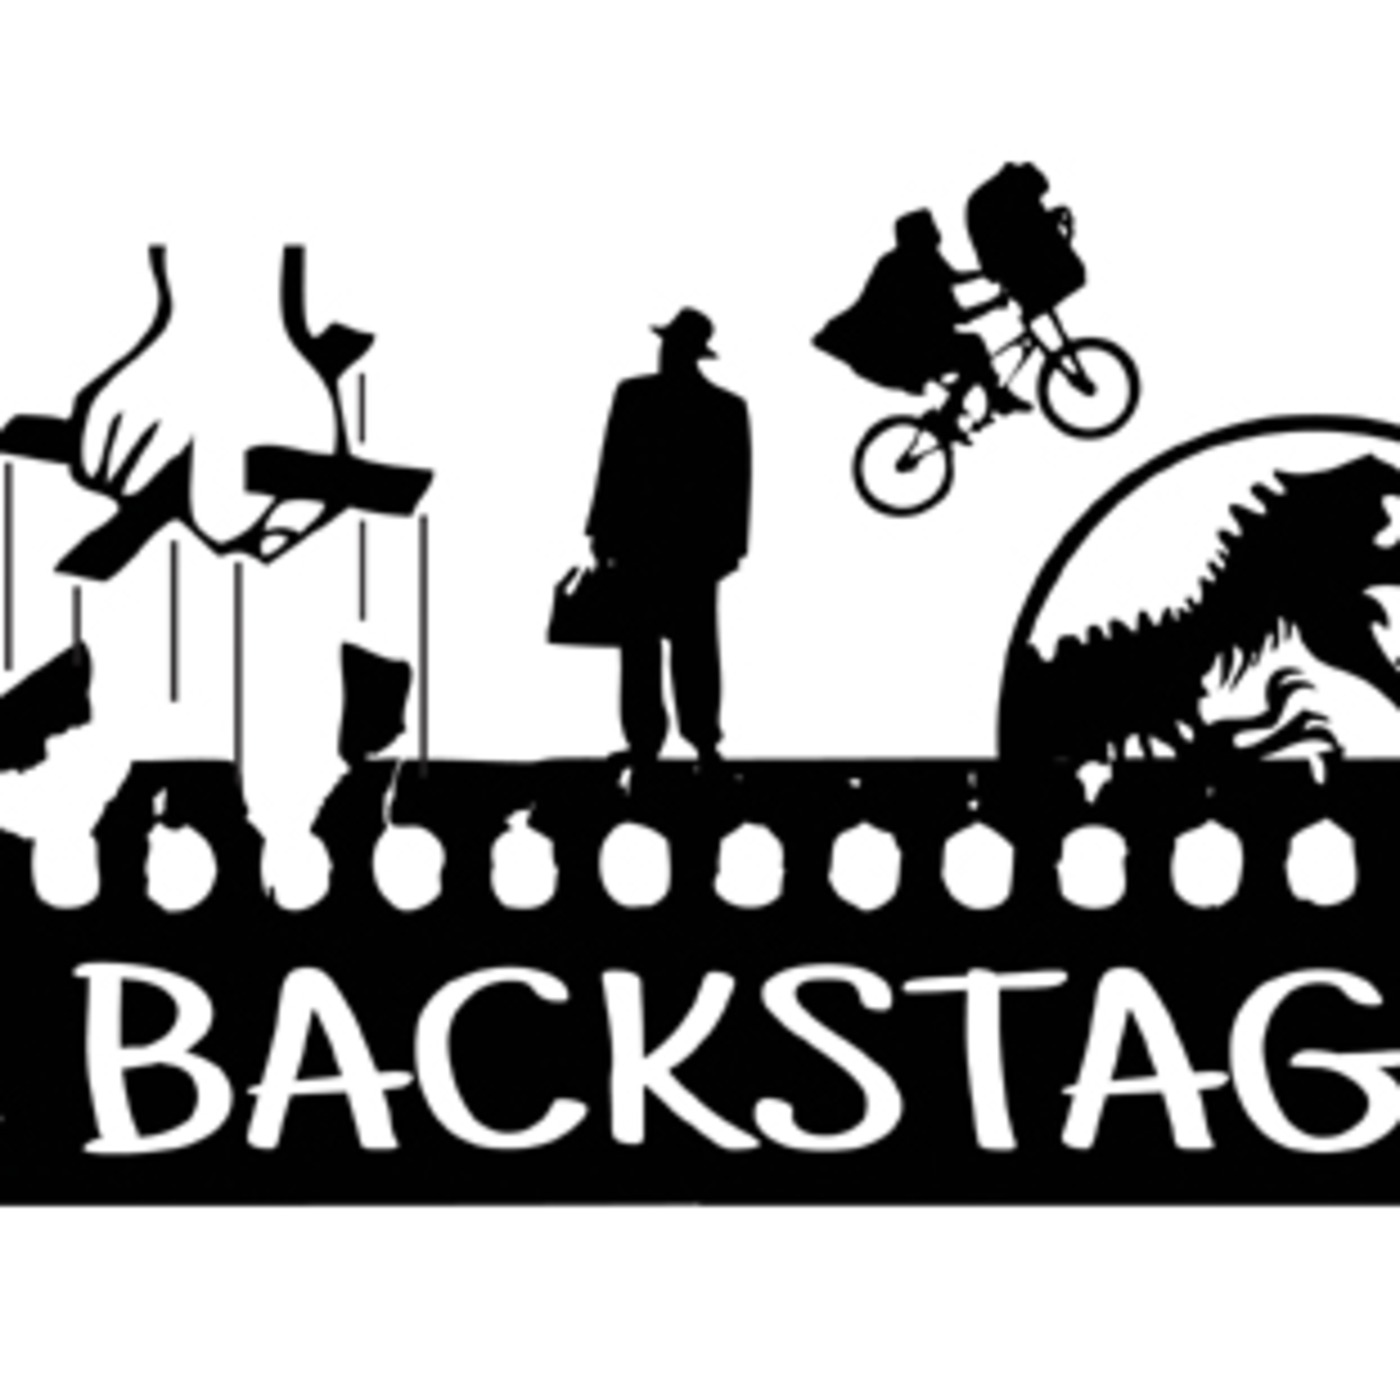 The Backstagers Podcast